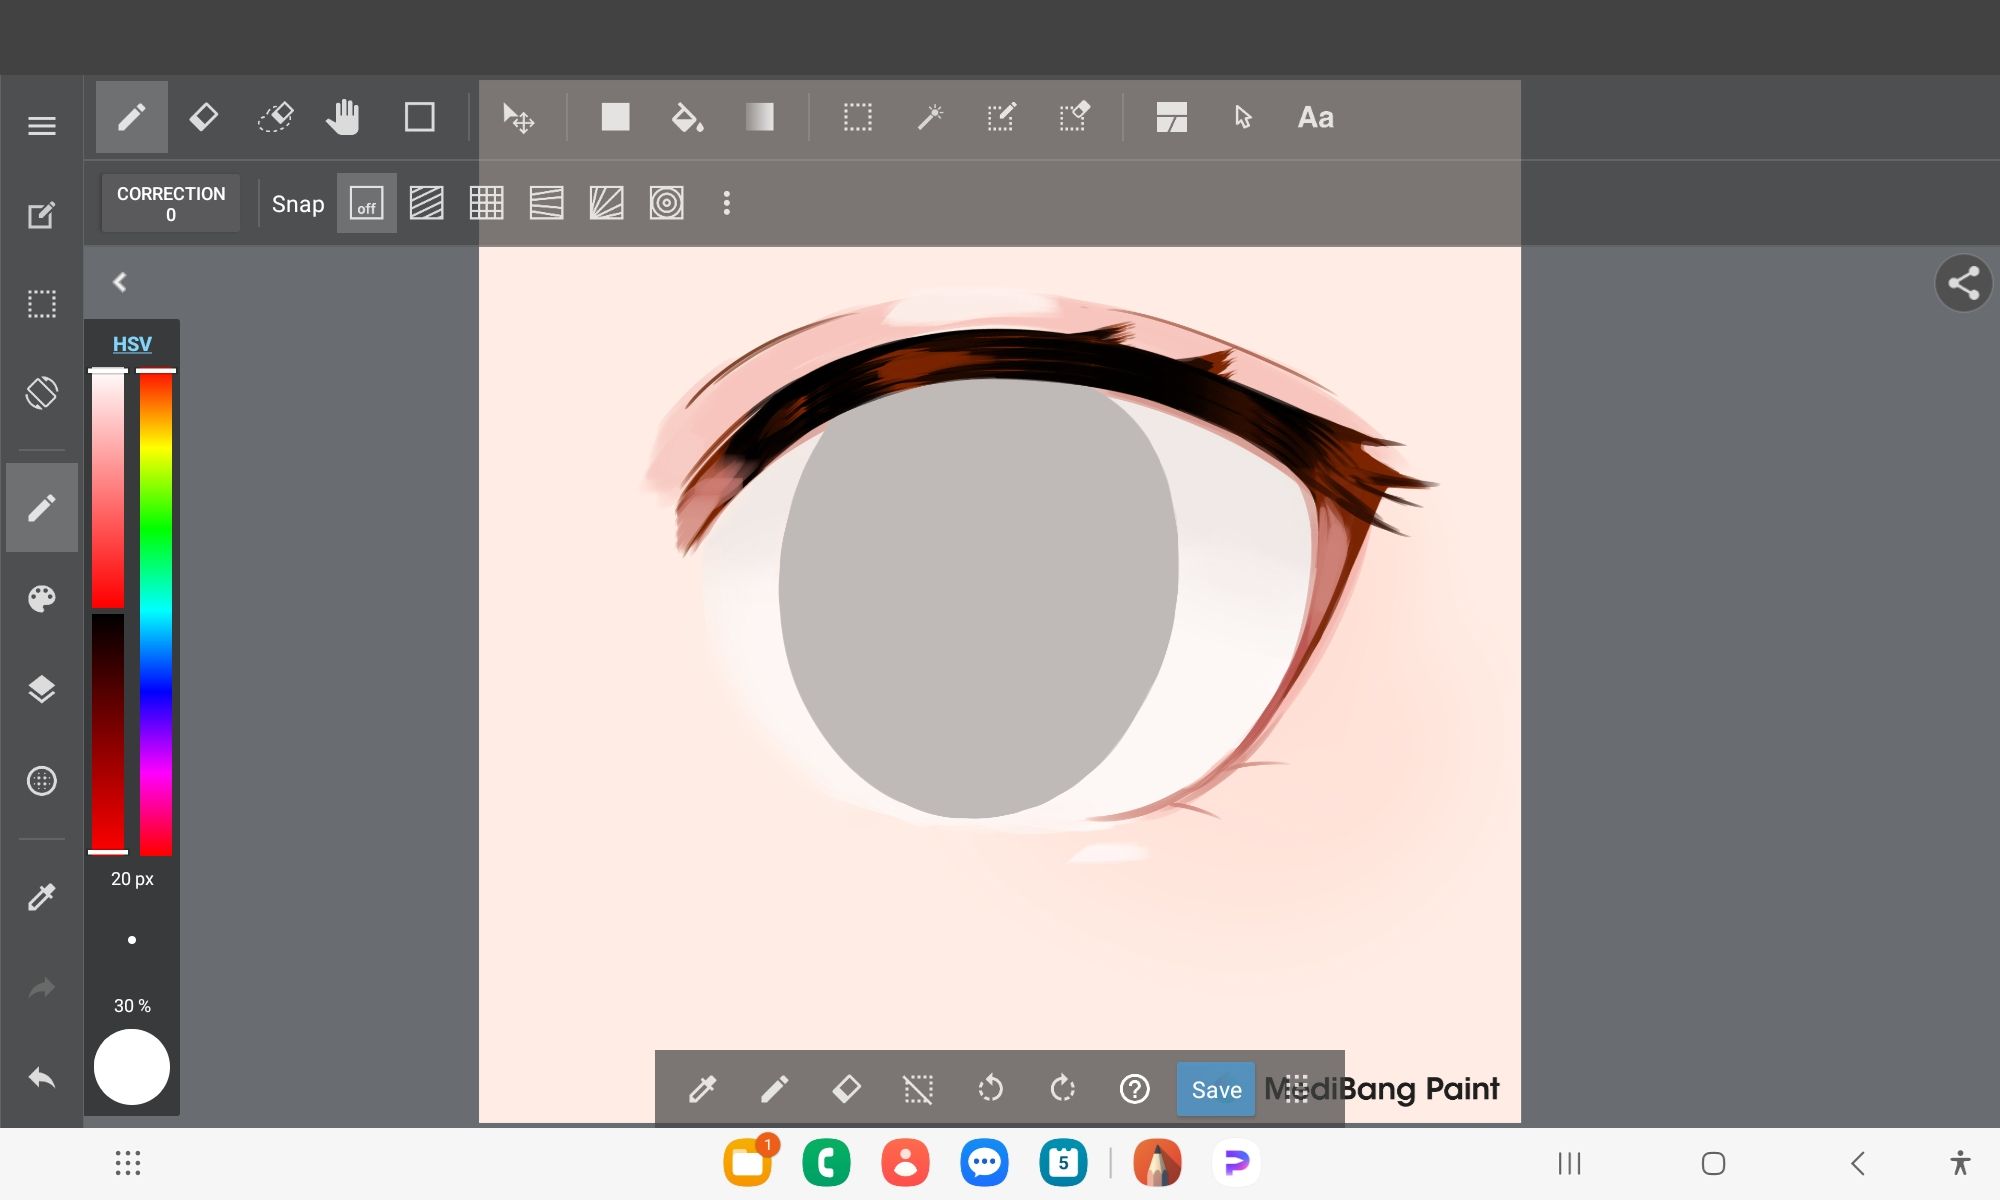 A template to draw an eye in MediBang Paint on Android.